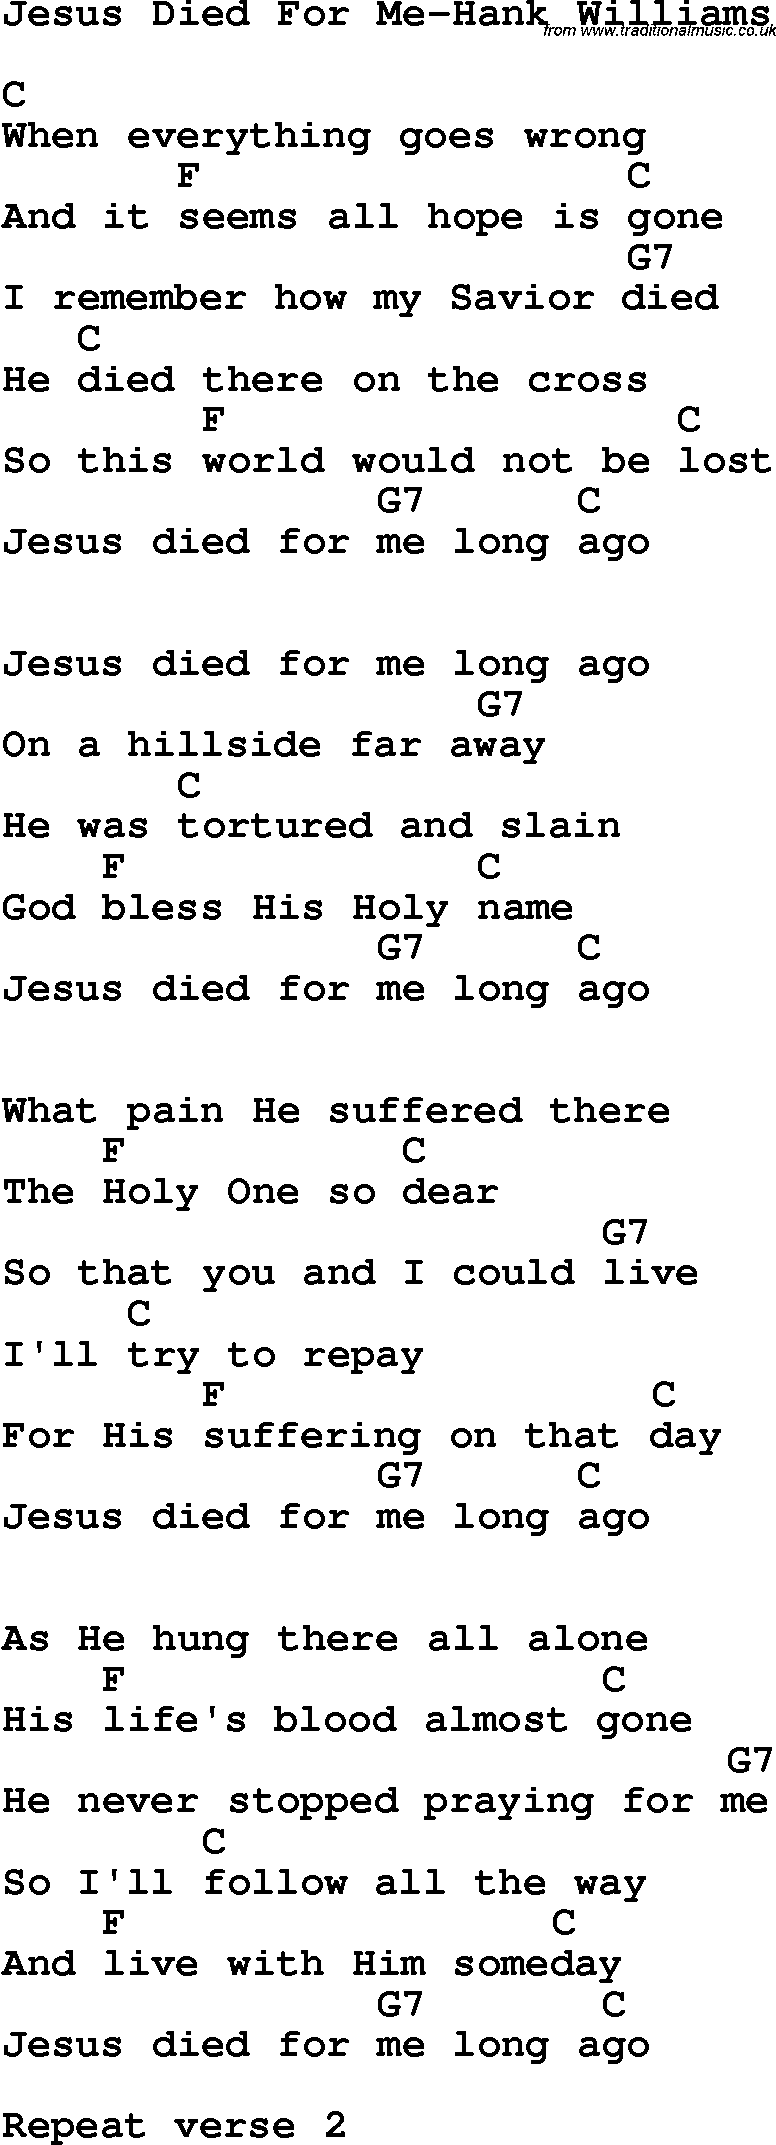 Country, Southern and Bluegrass Gospel Song Jesus Died For Me-Hank Williams lyrics and chords